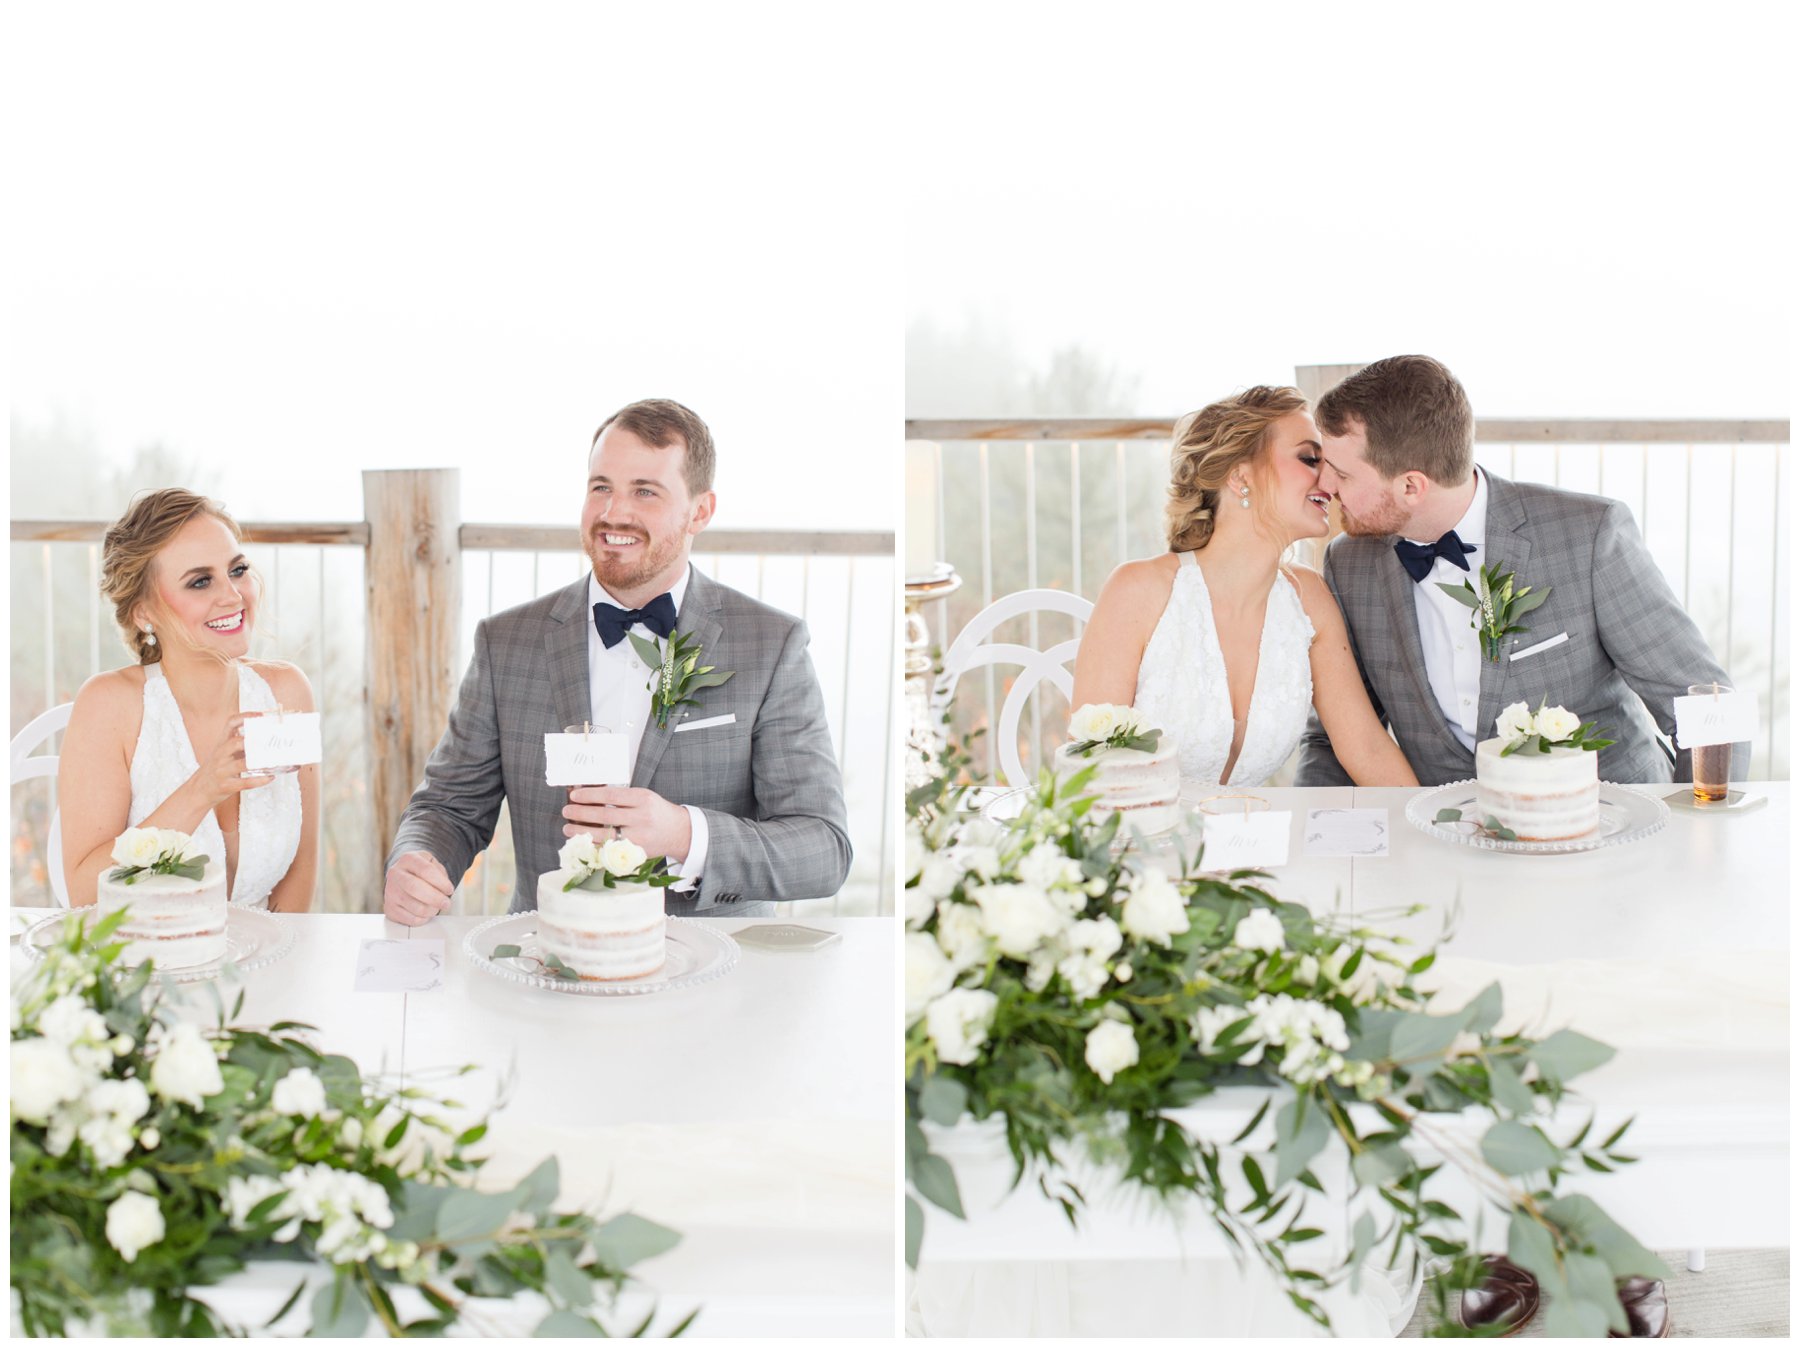 Le Belvedere Elopement Wakefield bride and groom kissing at sweetheart table